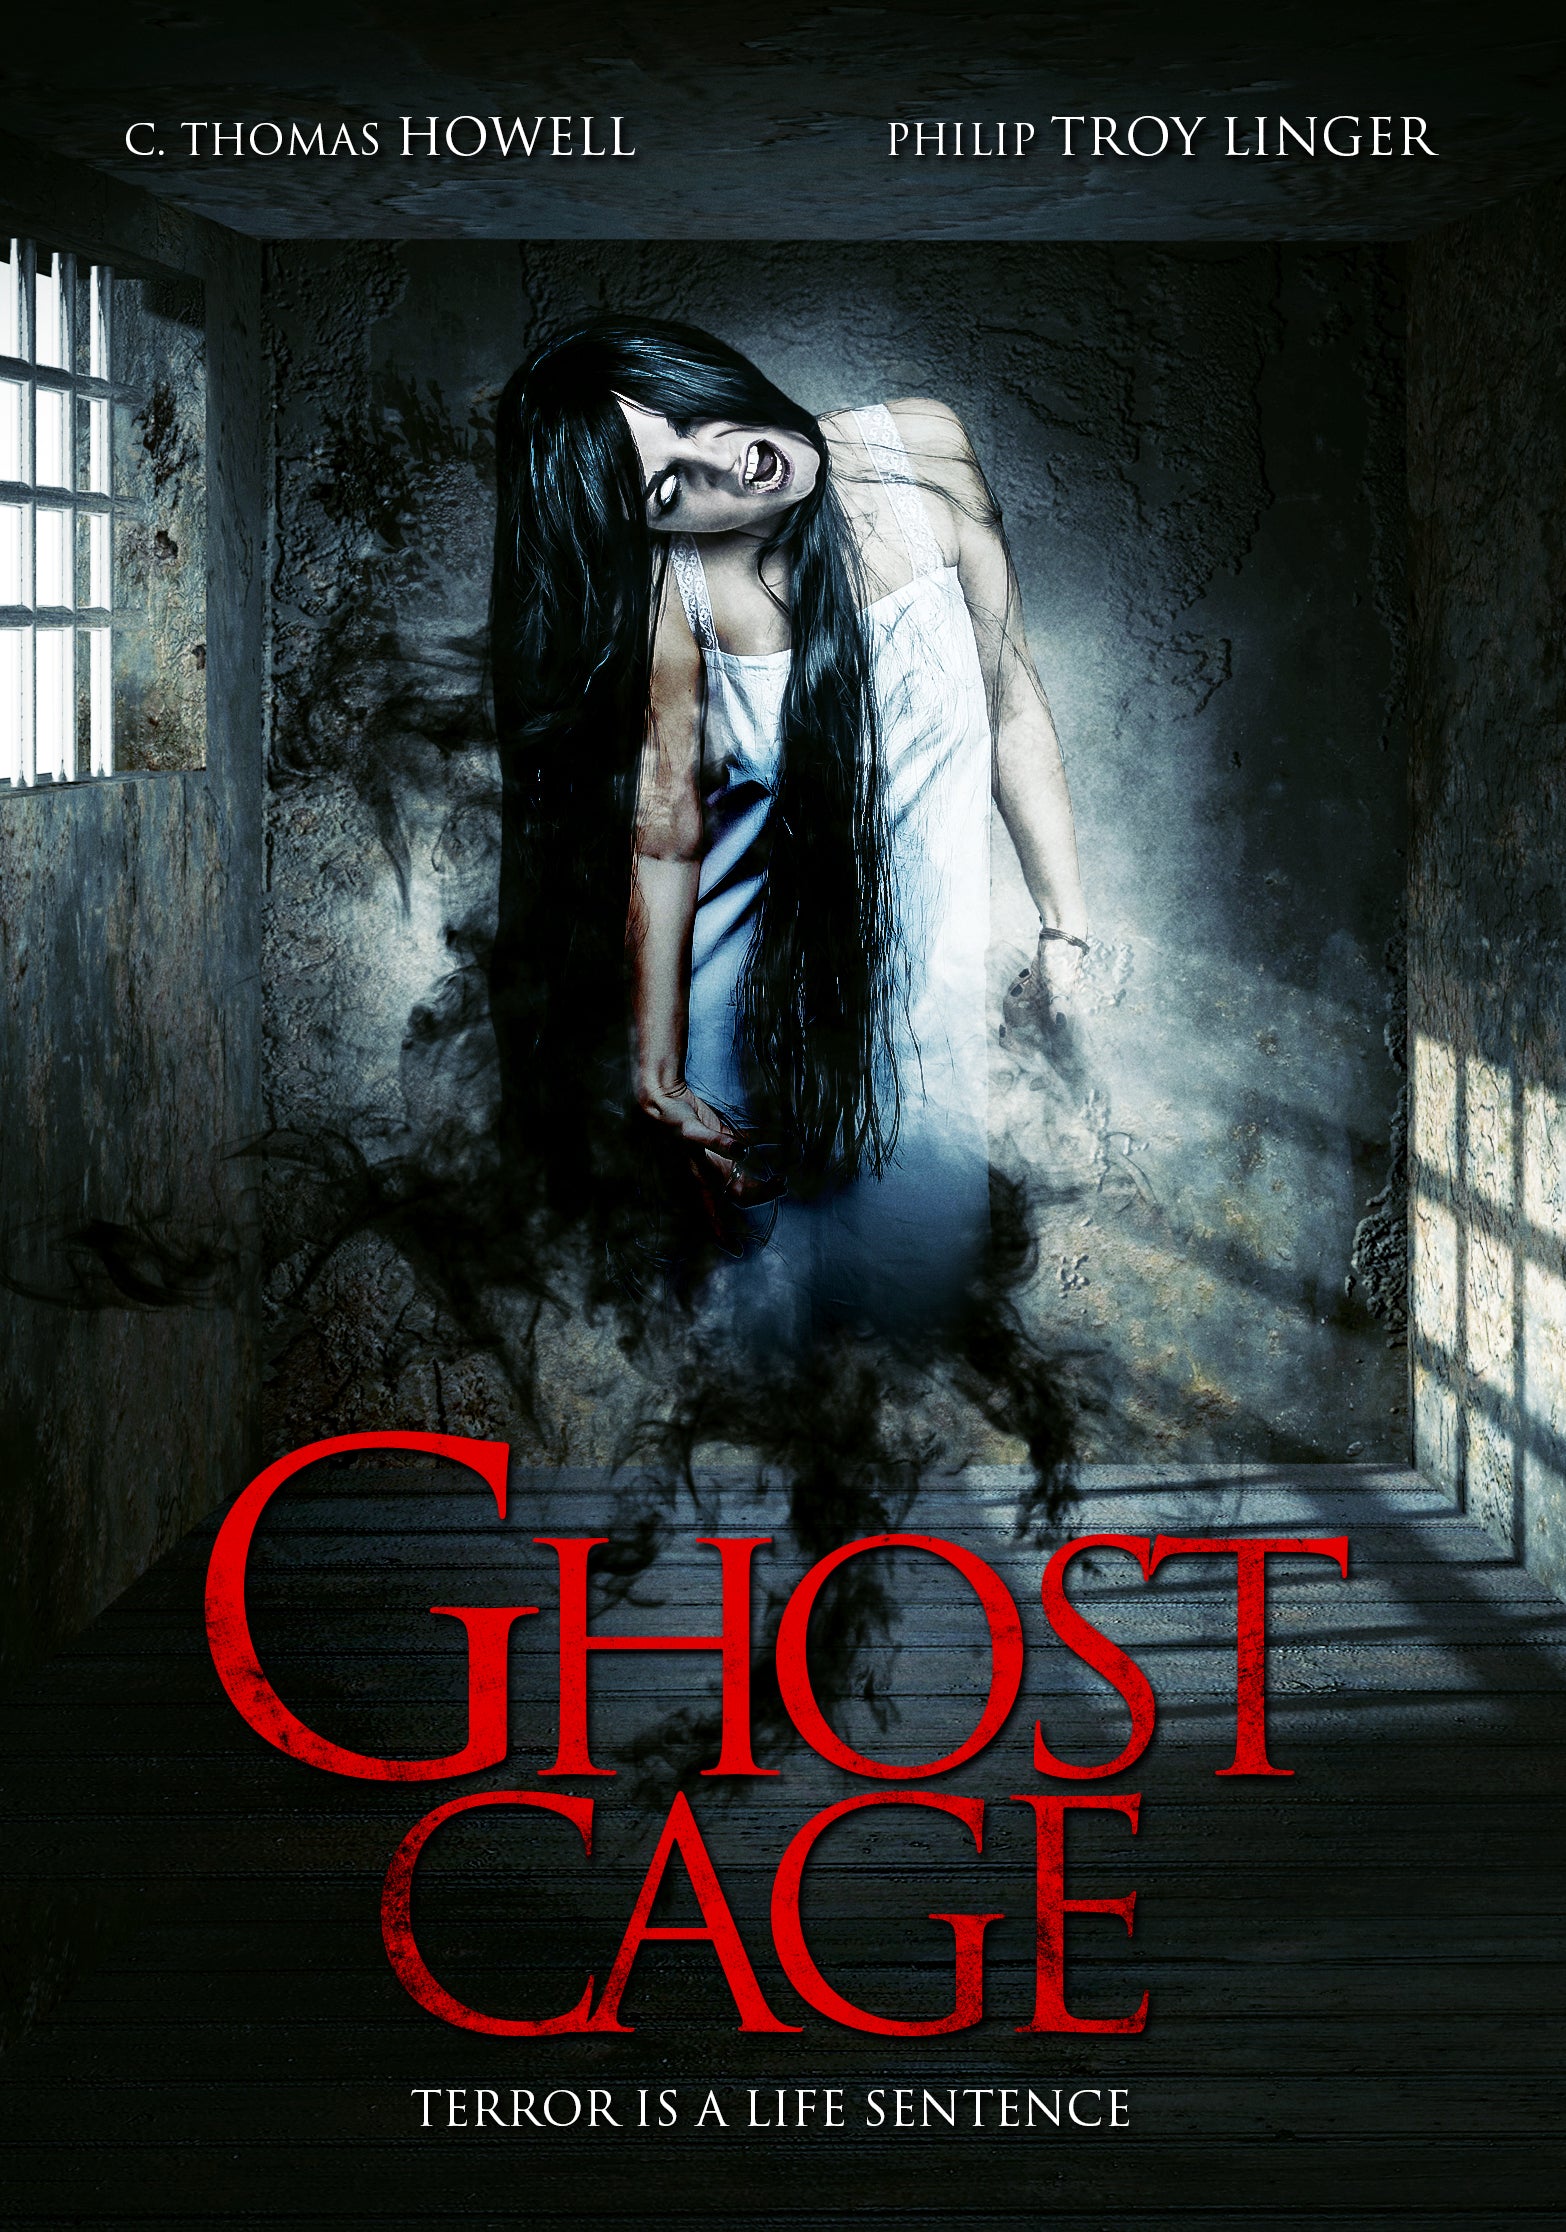 GHOST CAGE DVD